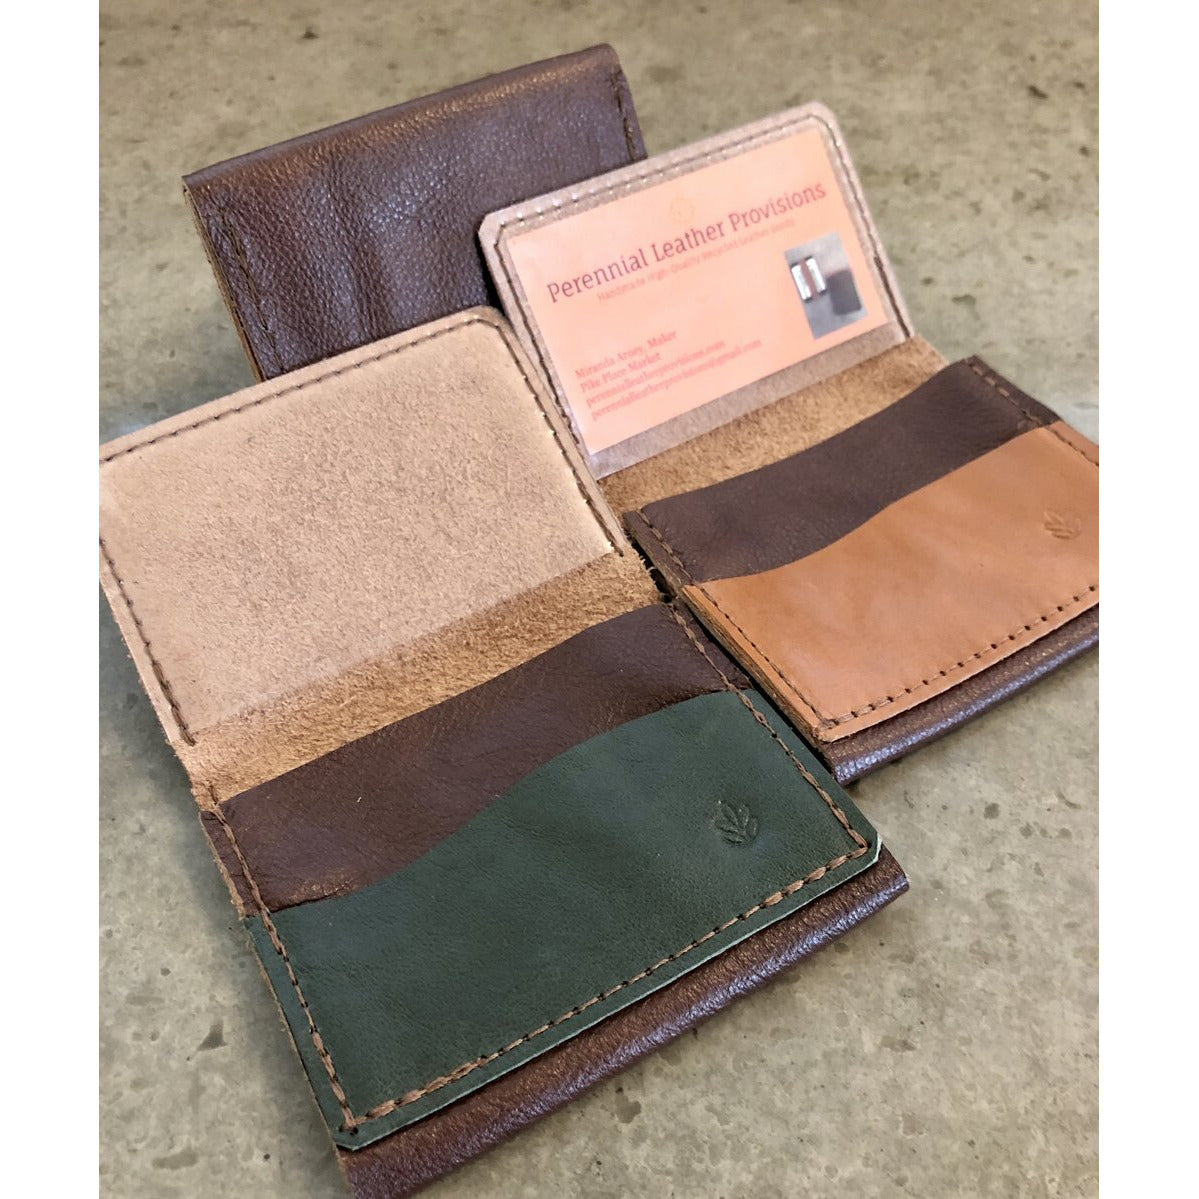 Leather Flip Pouch in Dark Brown, pictured with brown and green pockets, overhead view